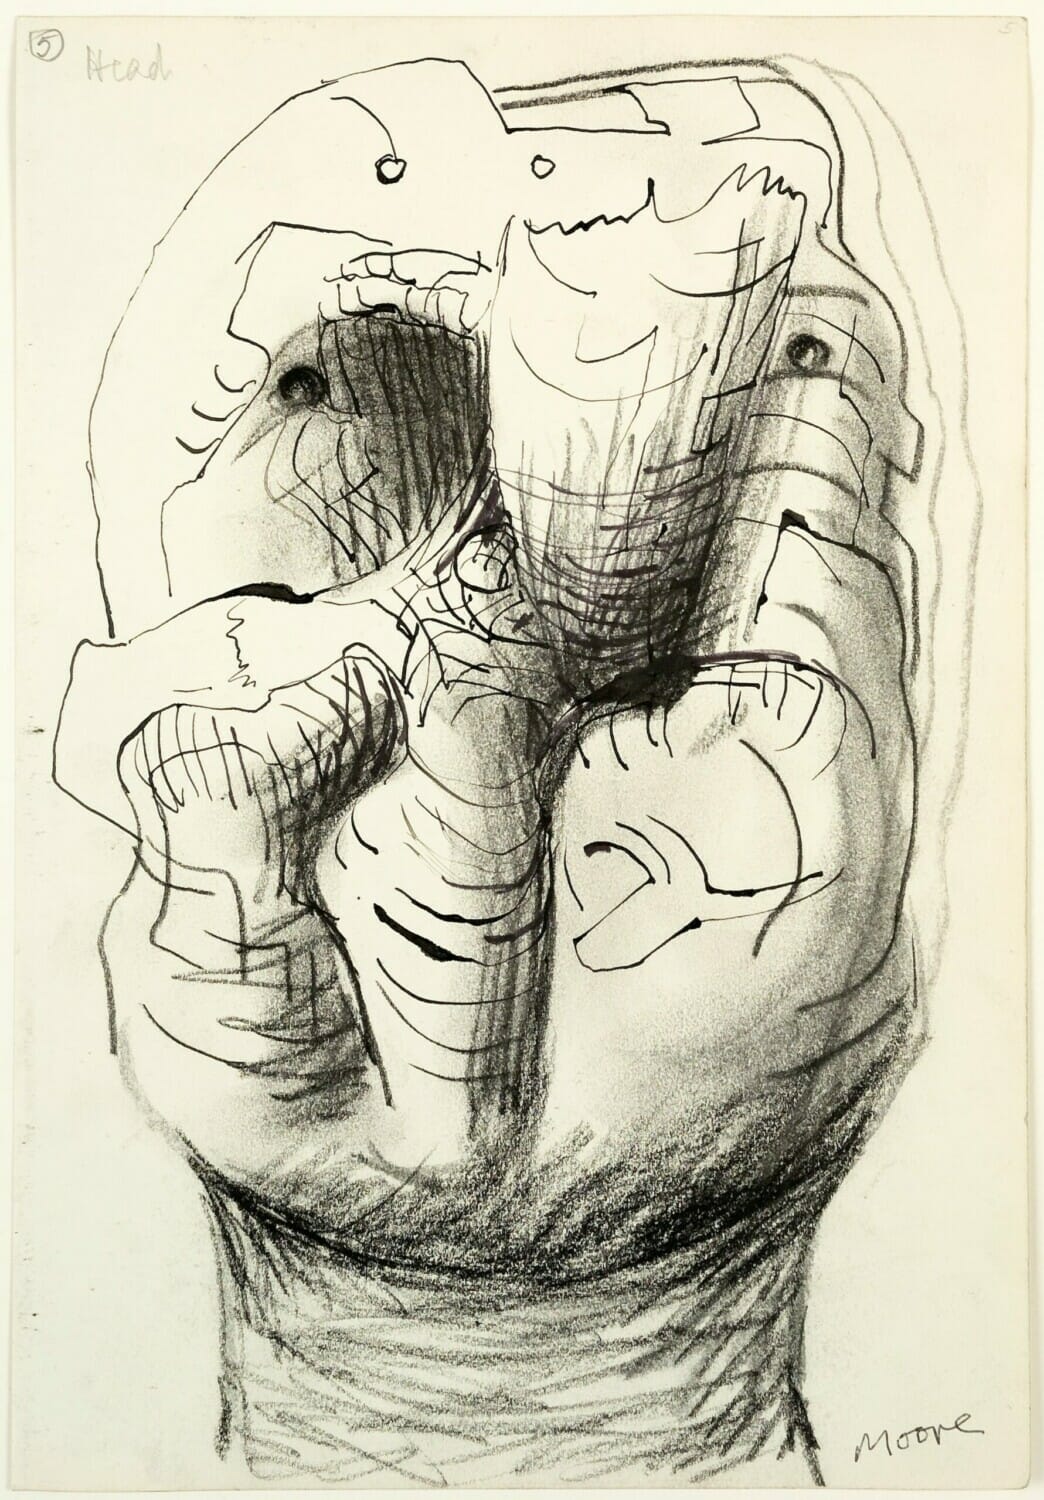 Henry Moore  Idea for Sculpture: Head 1969, 1977 Charcoal, ink and chinagraph on paper 25.4 x 17.6 cm / 10 x 6 7/8 in © The Henry Moore Foundation / DACS, London Courtesy Henry Moore Family Collection and Hauser & Wirth Photo: John Jones